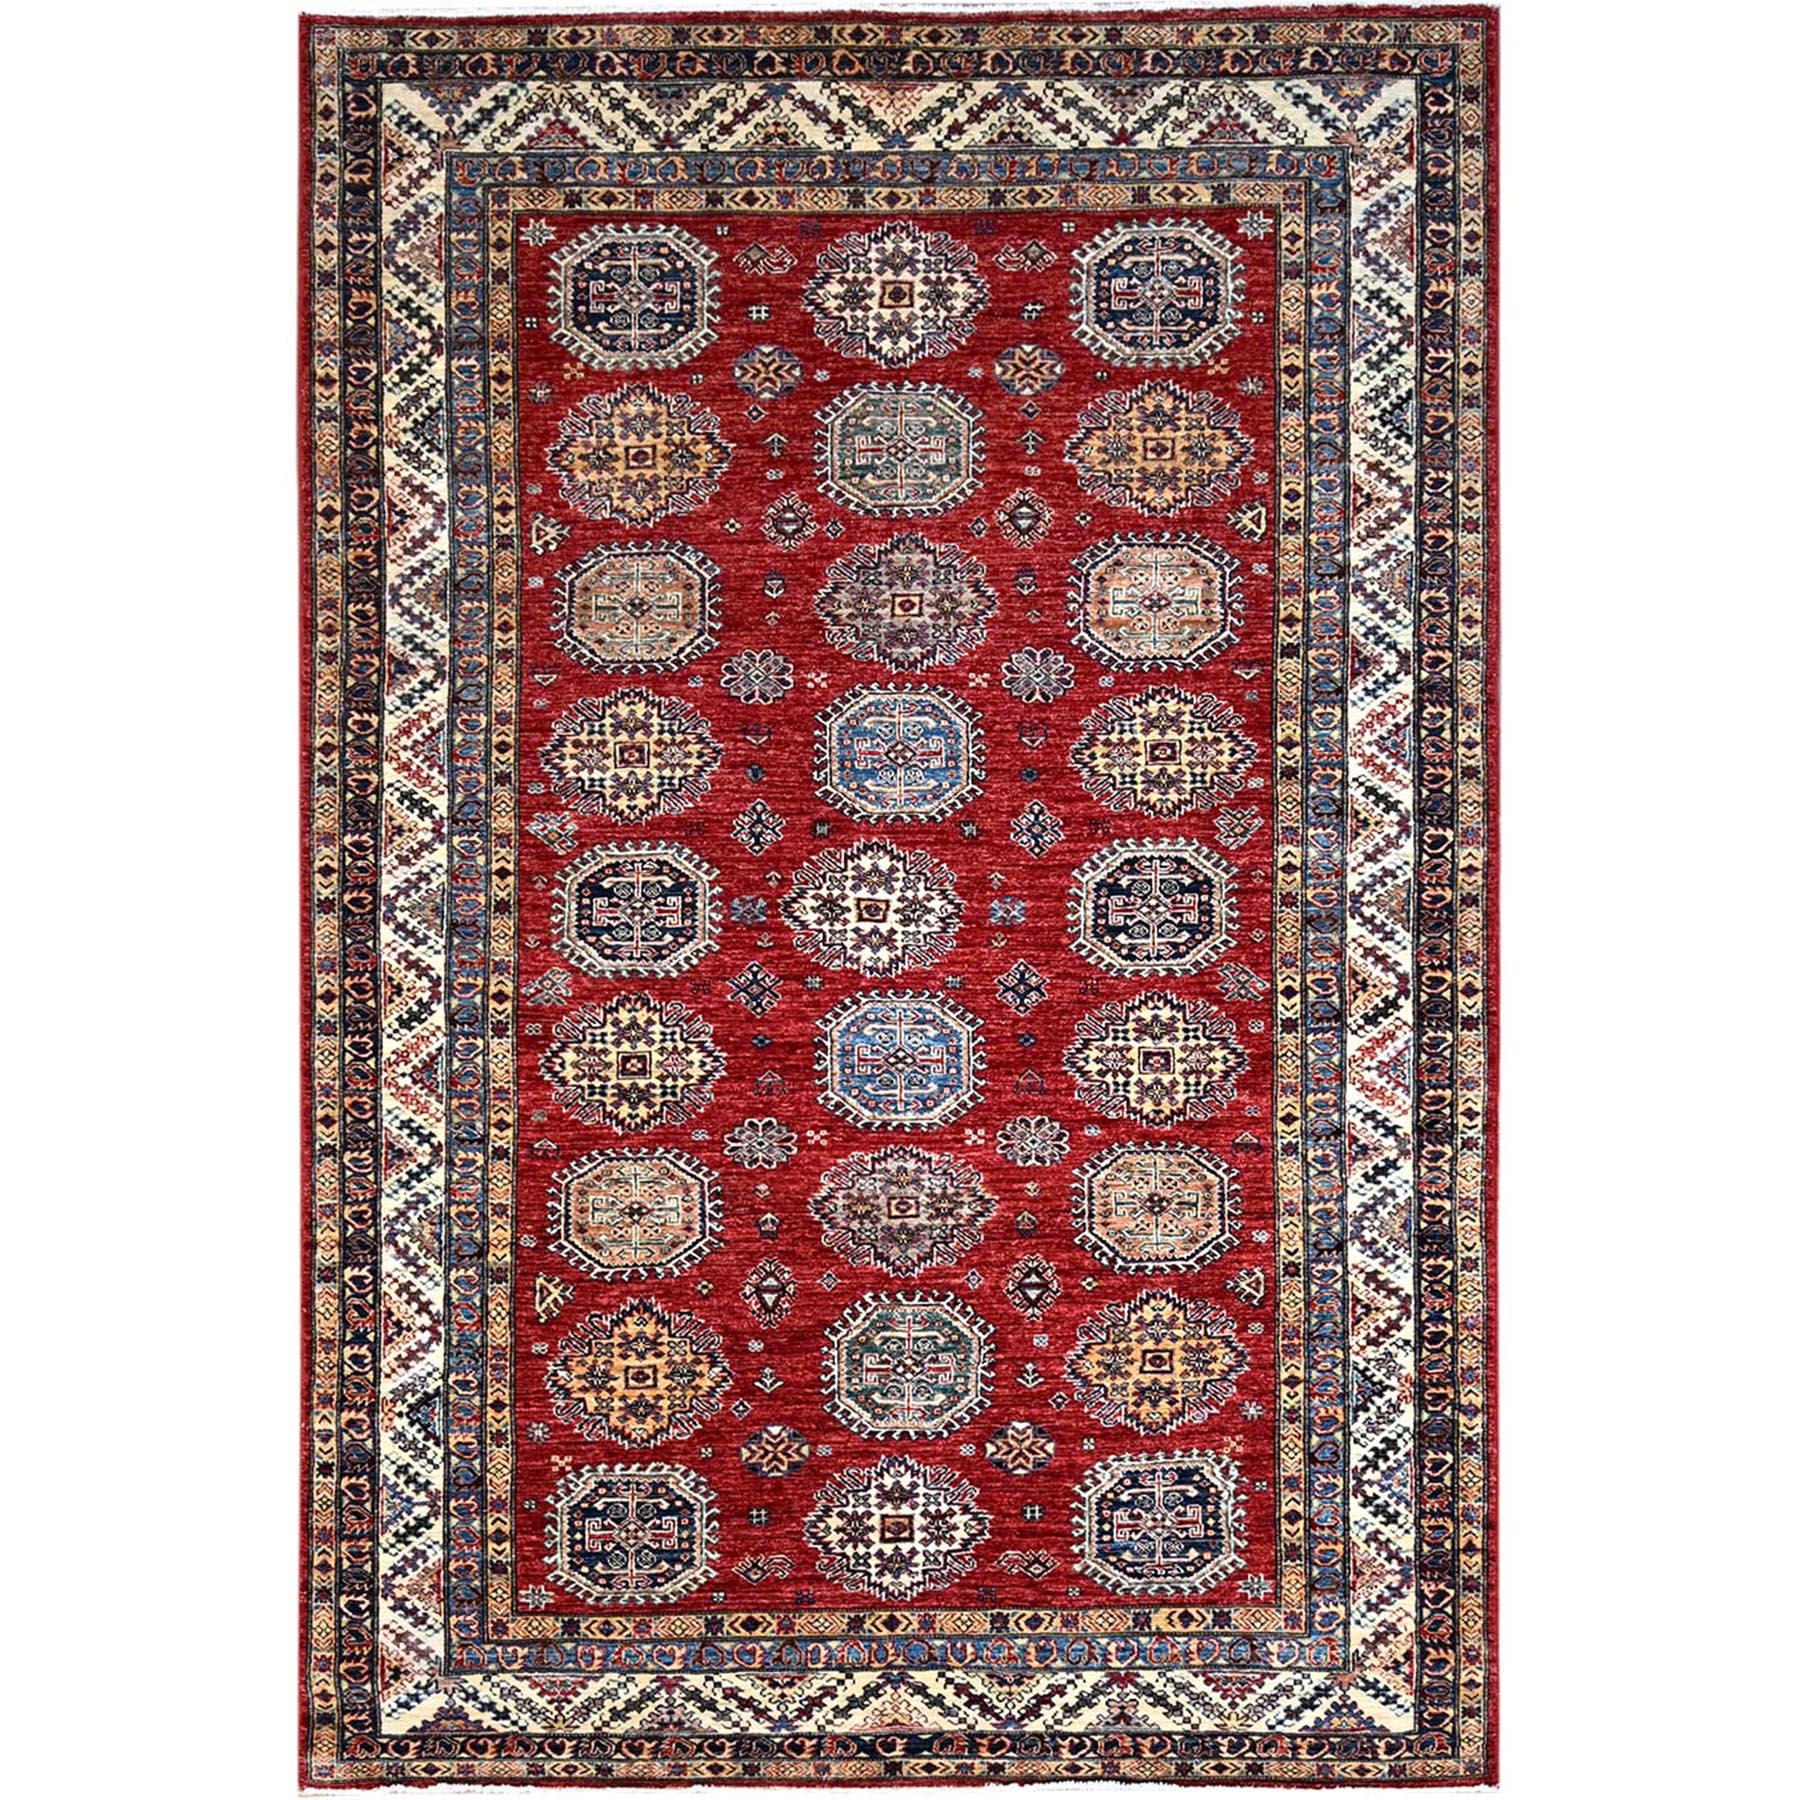 Toreador Red With Chantilly Lace White, Soft and Shiny Wool, Hand Knotted, Denser Weave, Vegetable Dyes, Afghan Super Kazak with All Over Medallions, Oriental Rug